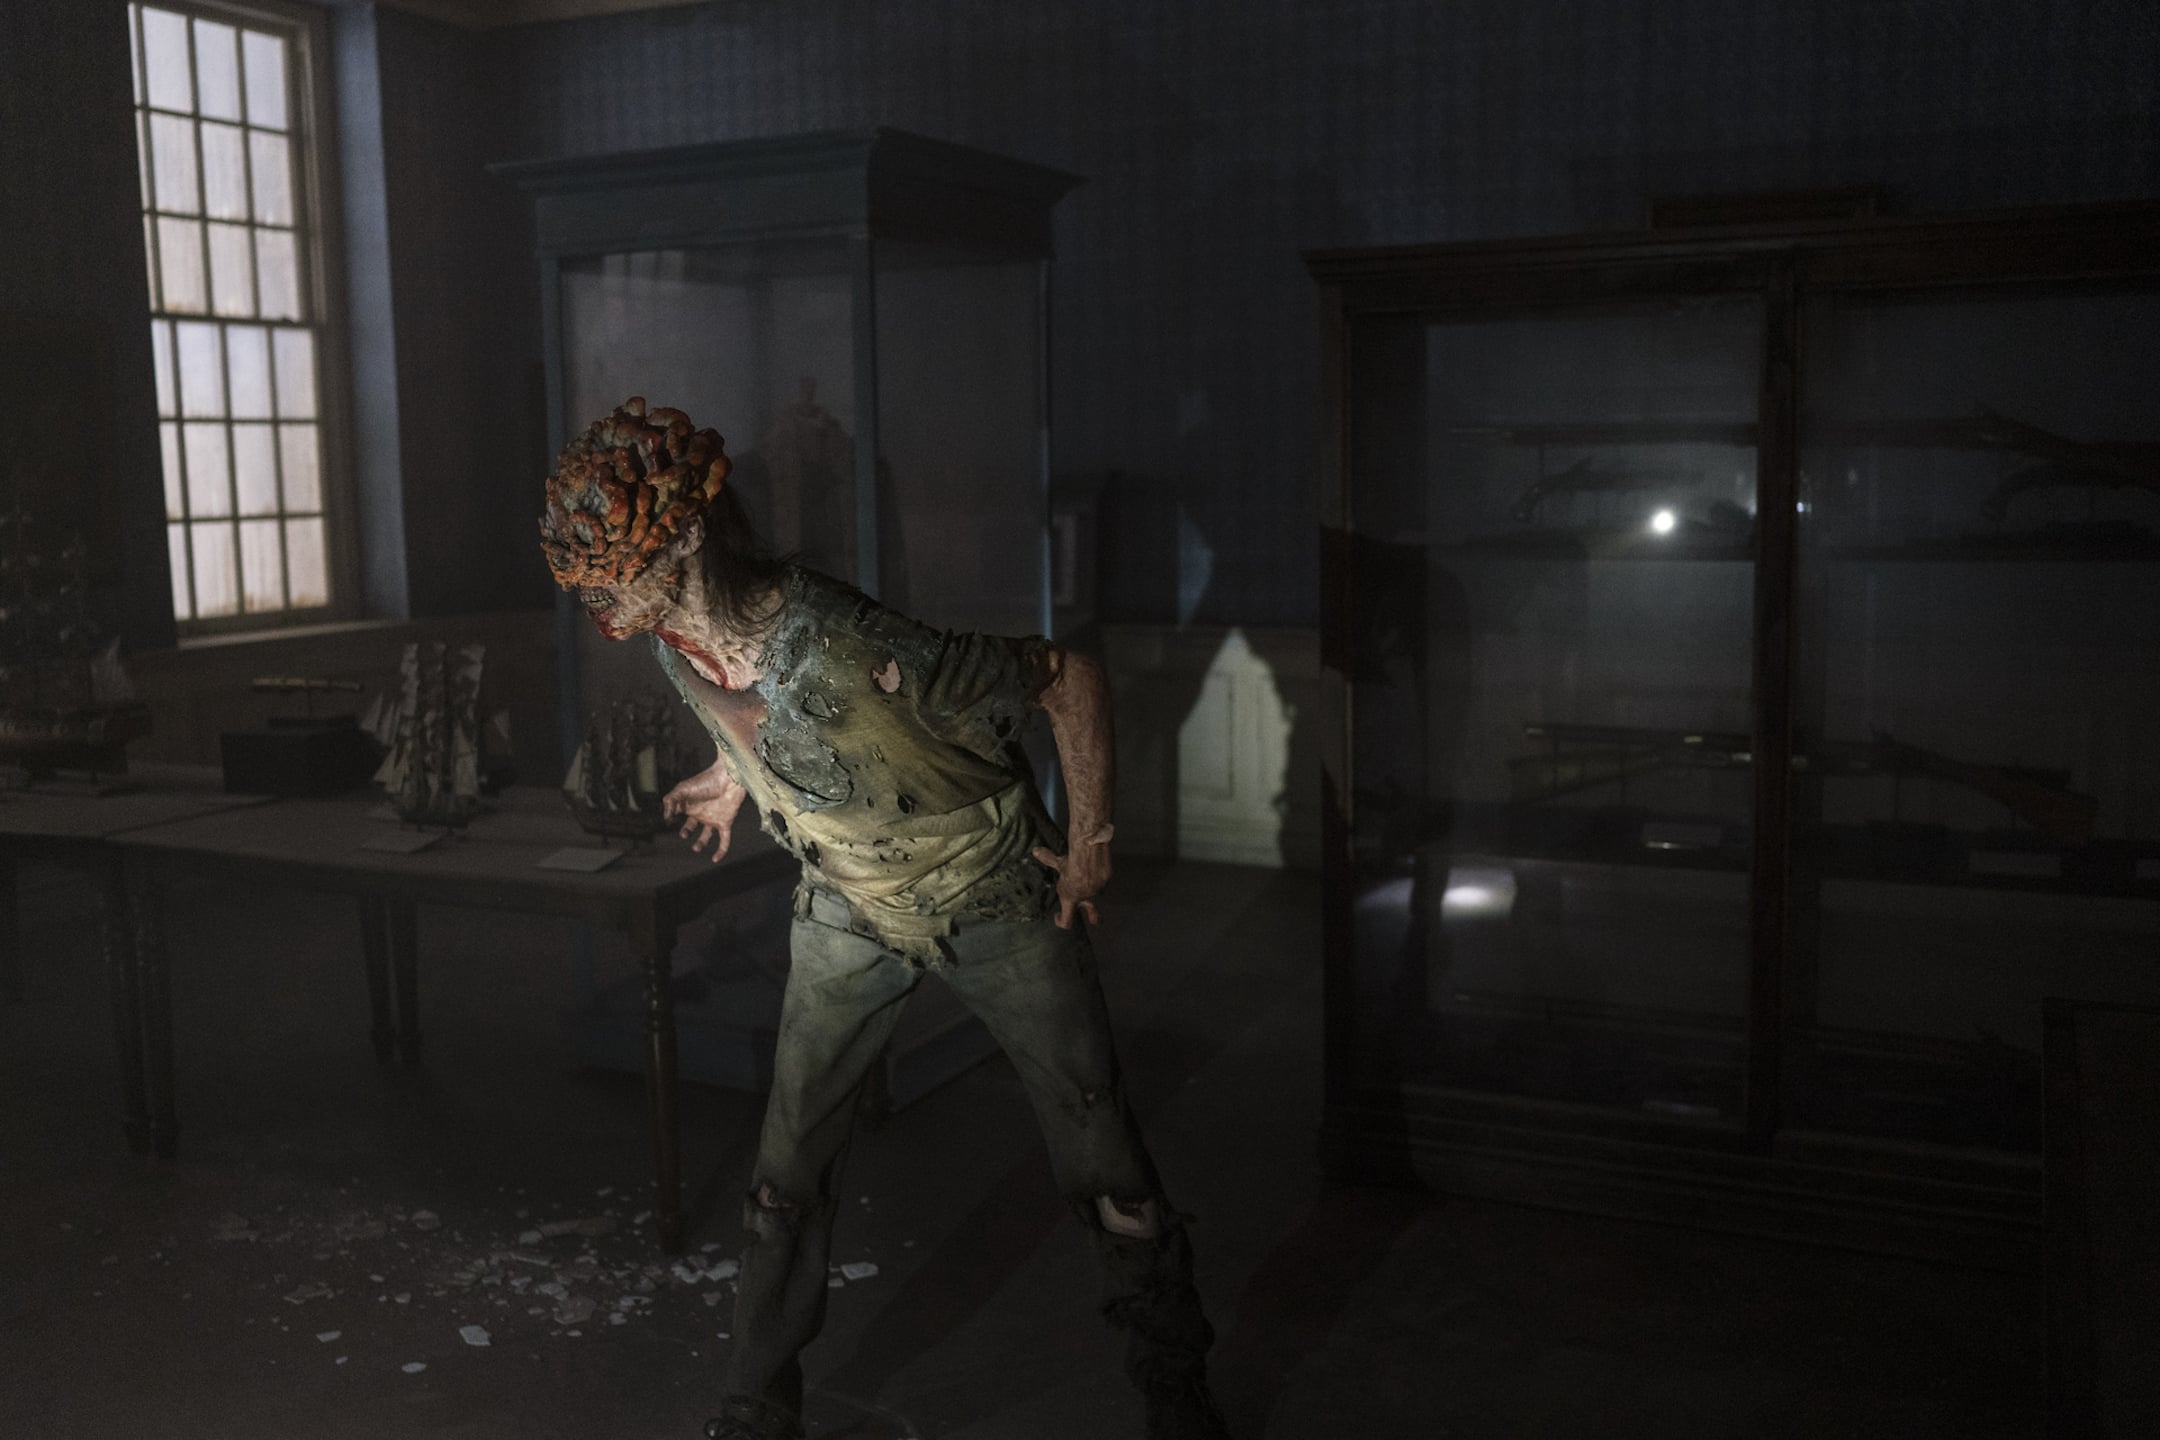 Joel's Condition in HBO's 'The Last of Us', Explained